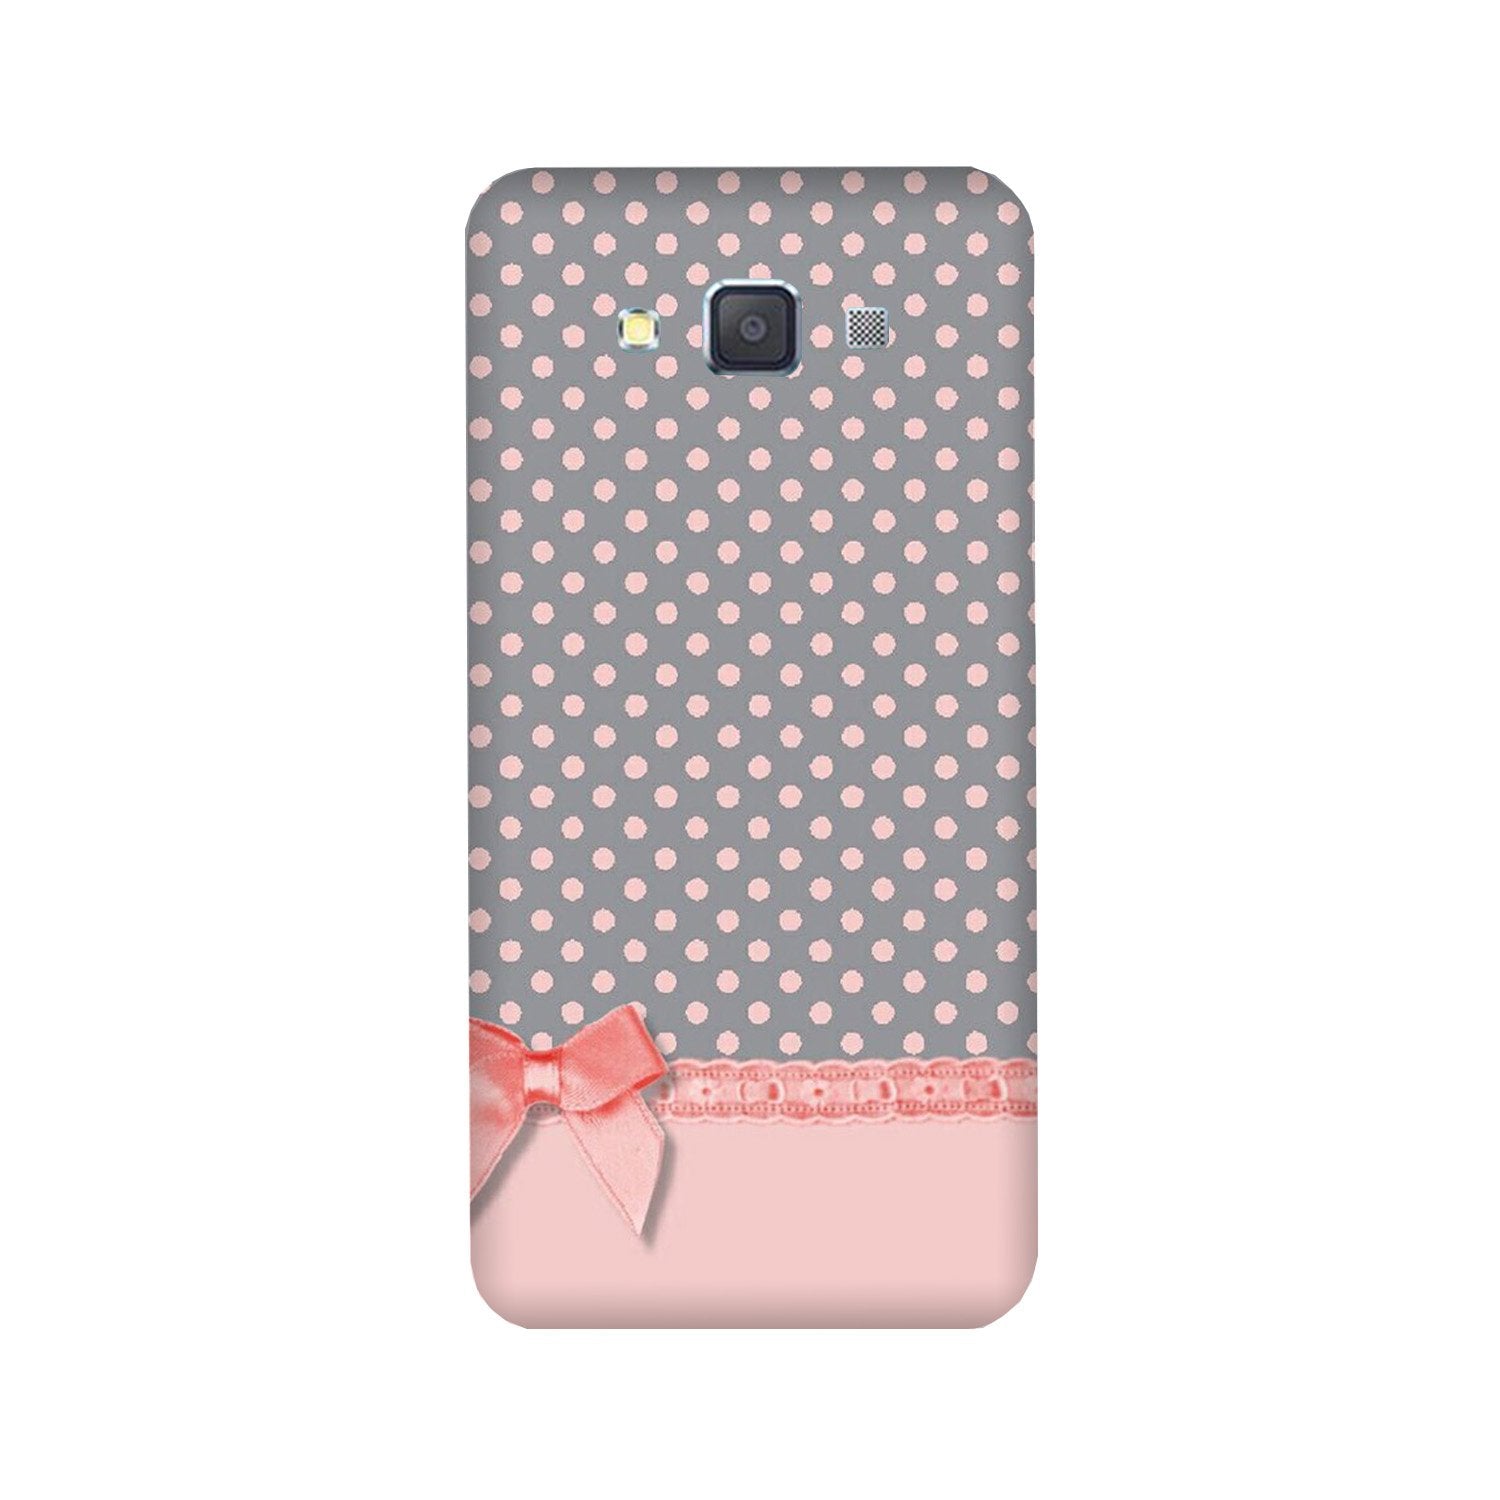 Gift Wrap2 Case for Galaxy J7 (2016)